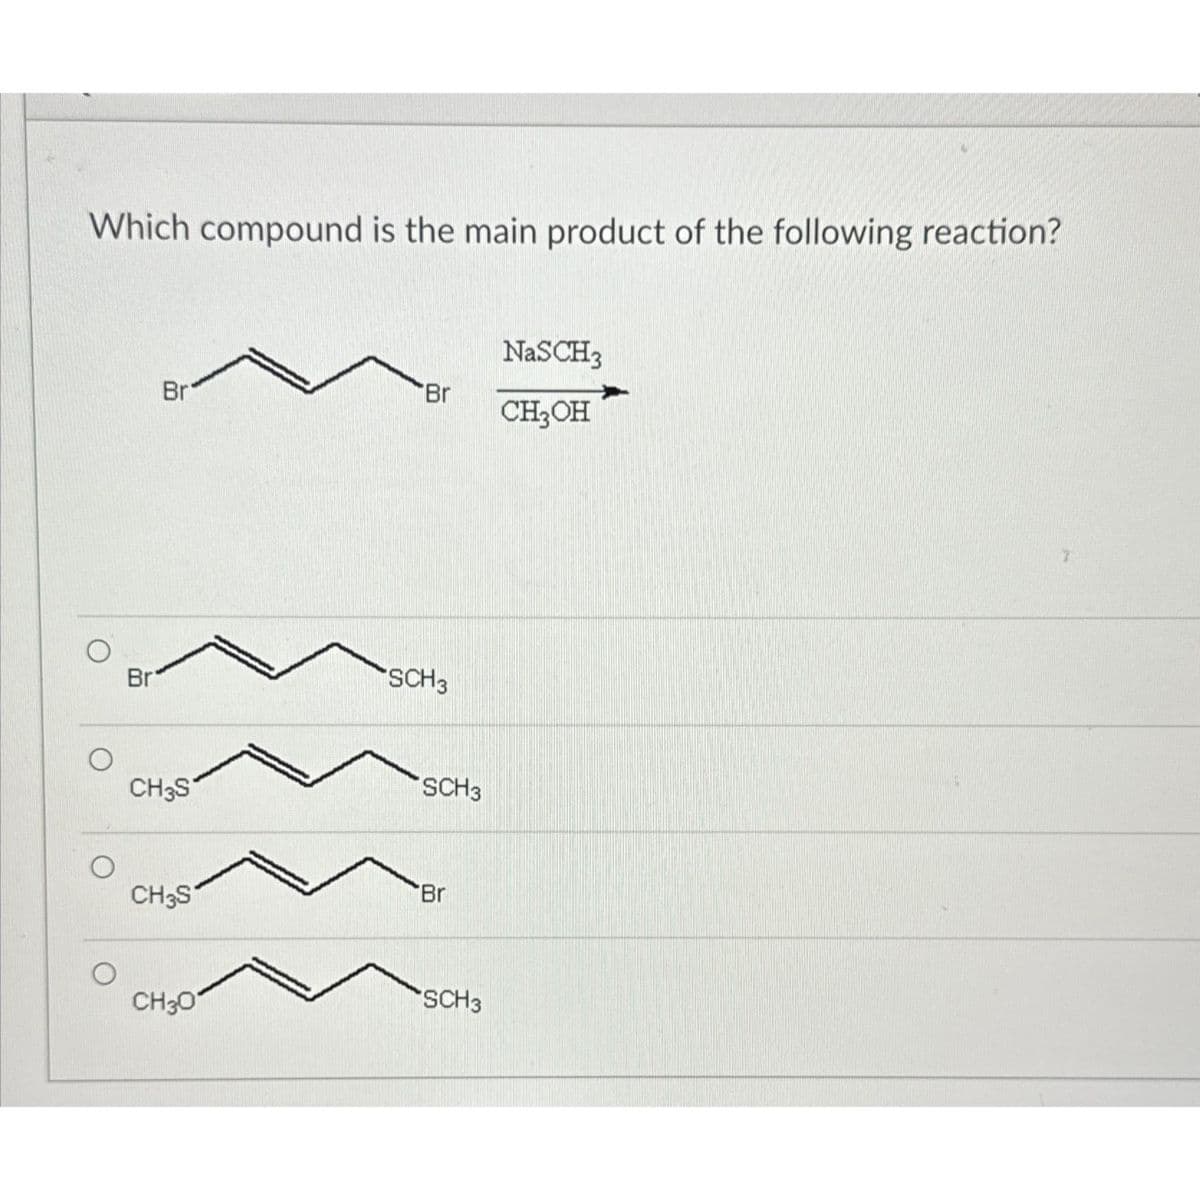 Which compound is the main product of the following reaction?
O
O
O
Br
Br
CH3S
CH3S
CH3O
Br
SCH3
SCH3
Br
SCH3
NaSCH3
CH3OH